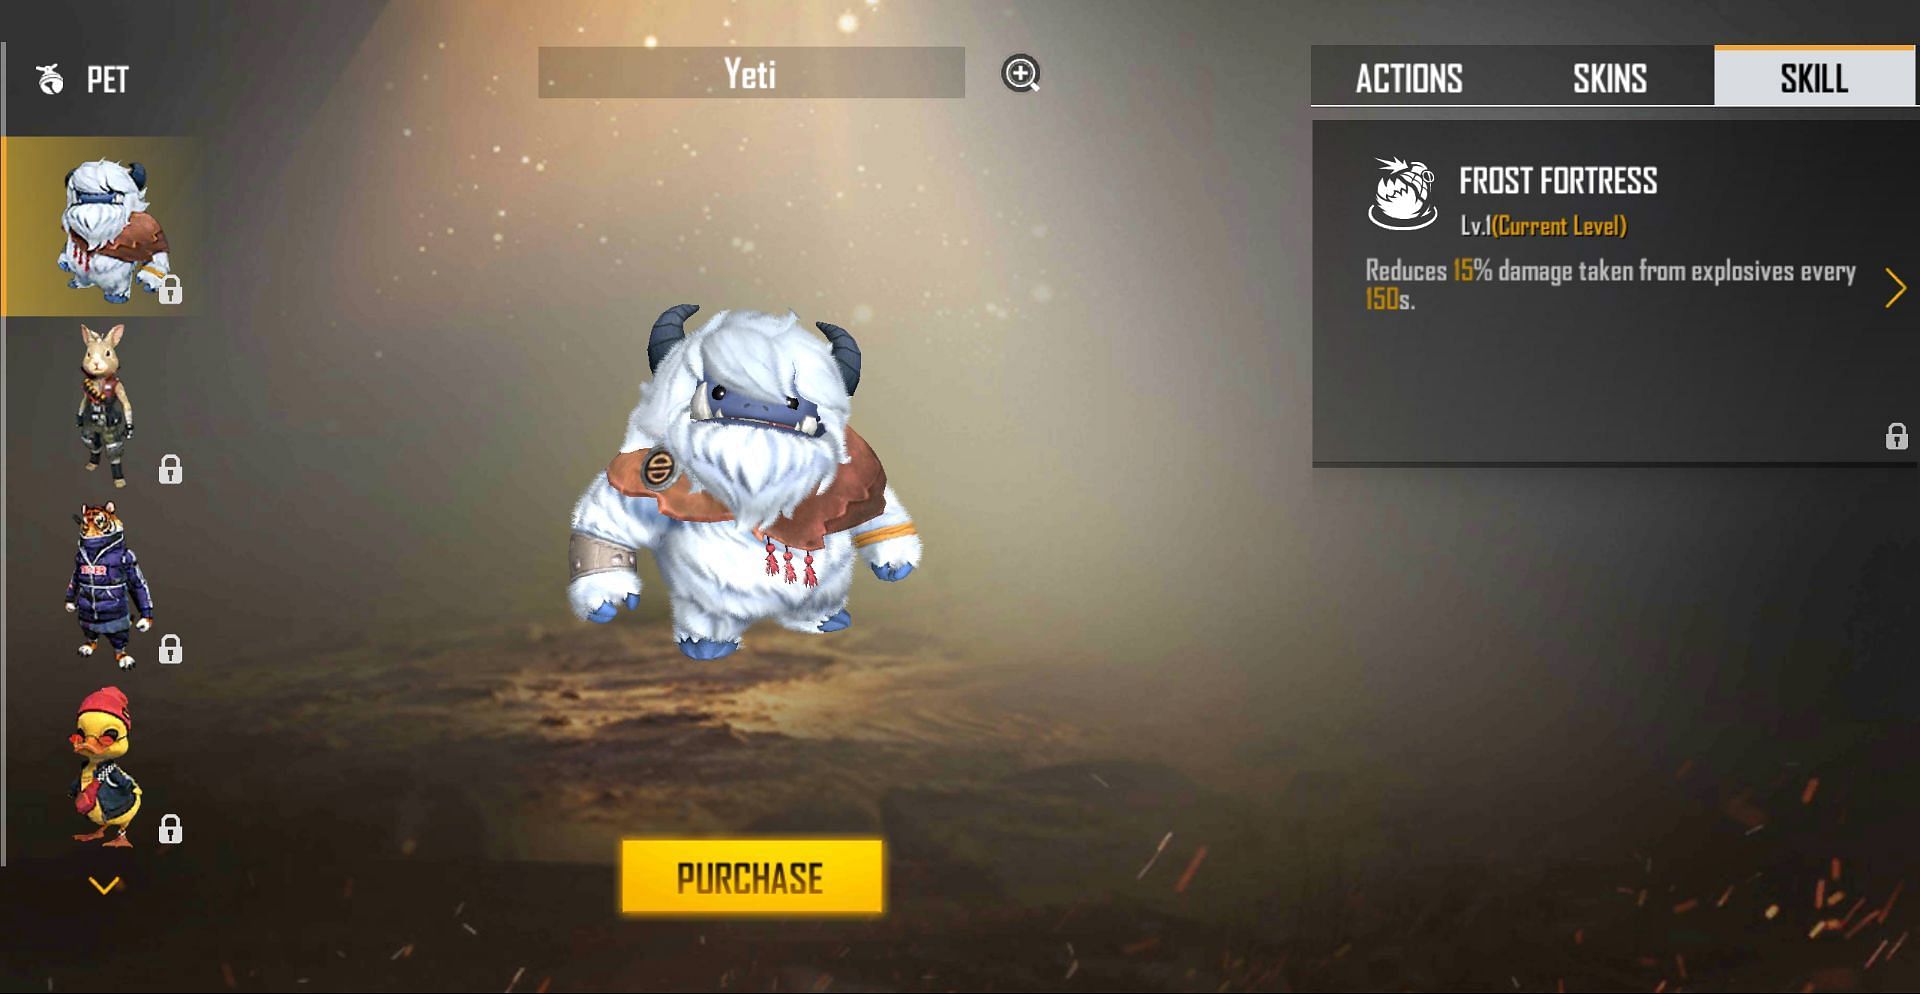 The pet is not currently accessible to players (Image via Free Fire)